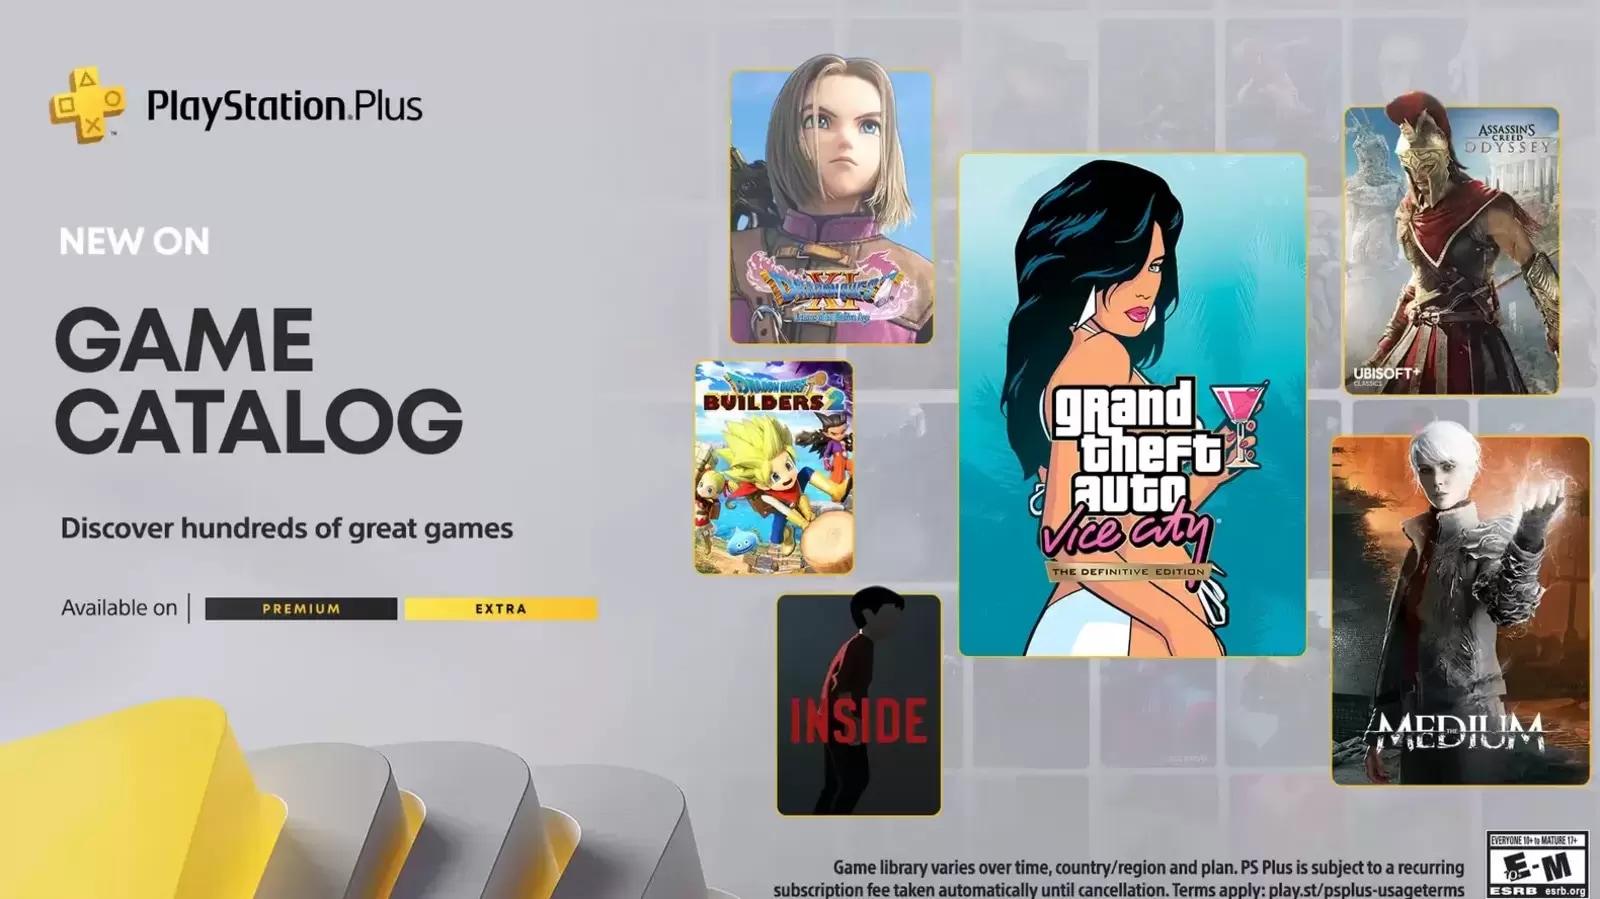 PlayStation Plus unveils monthly games for November